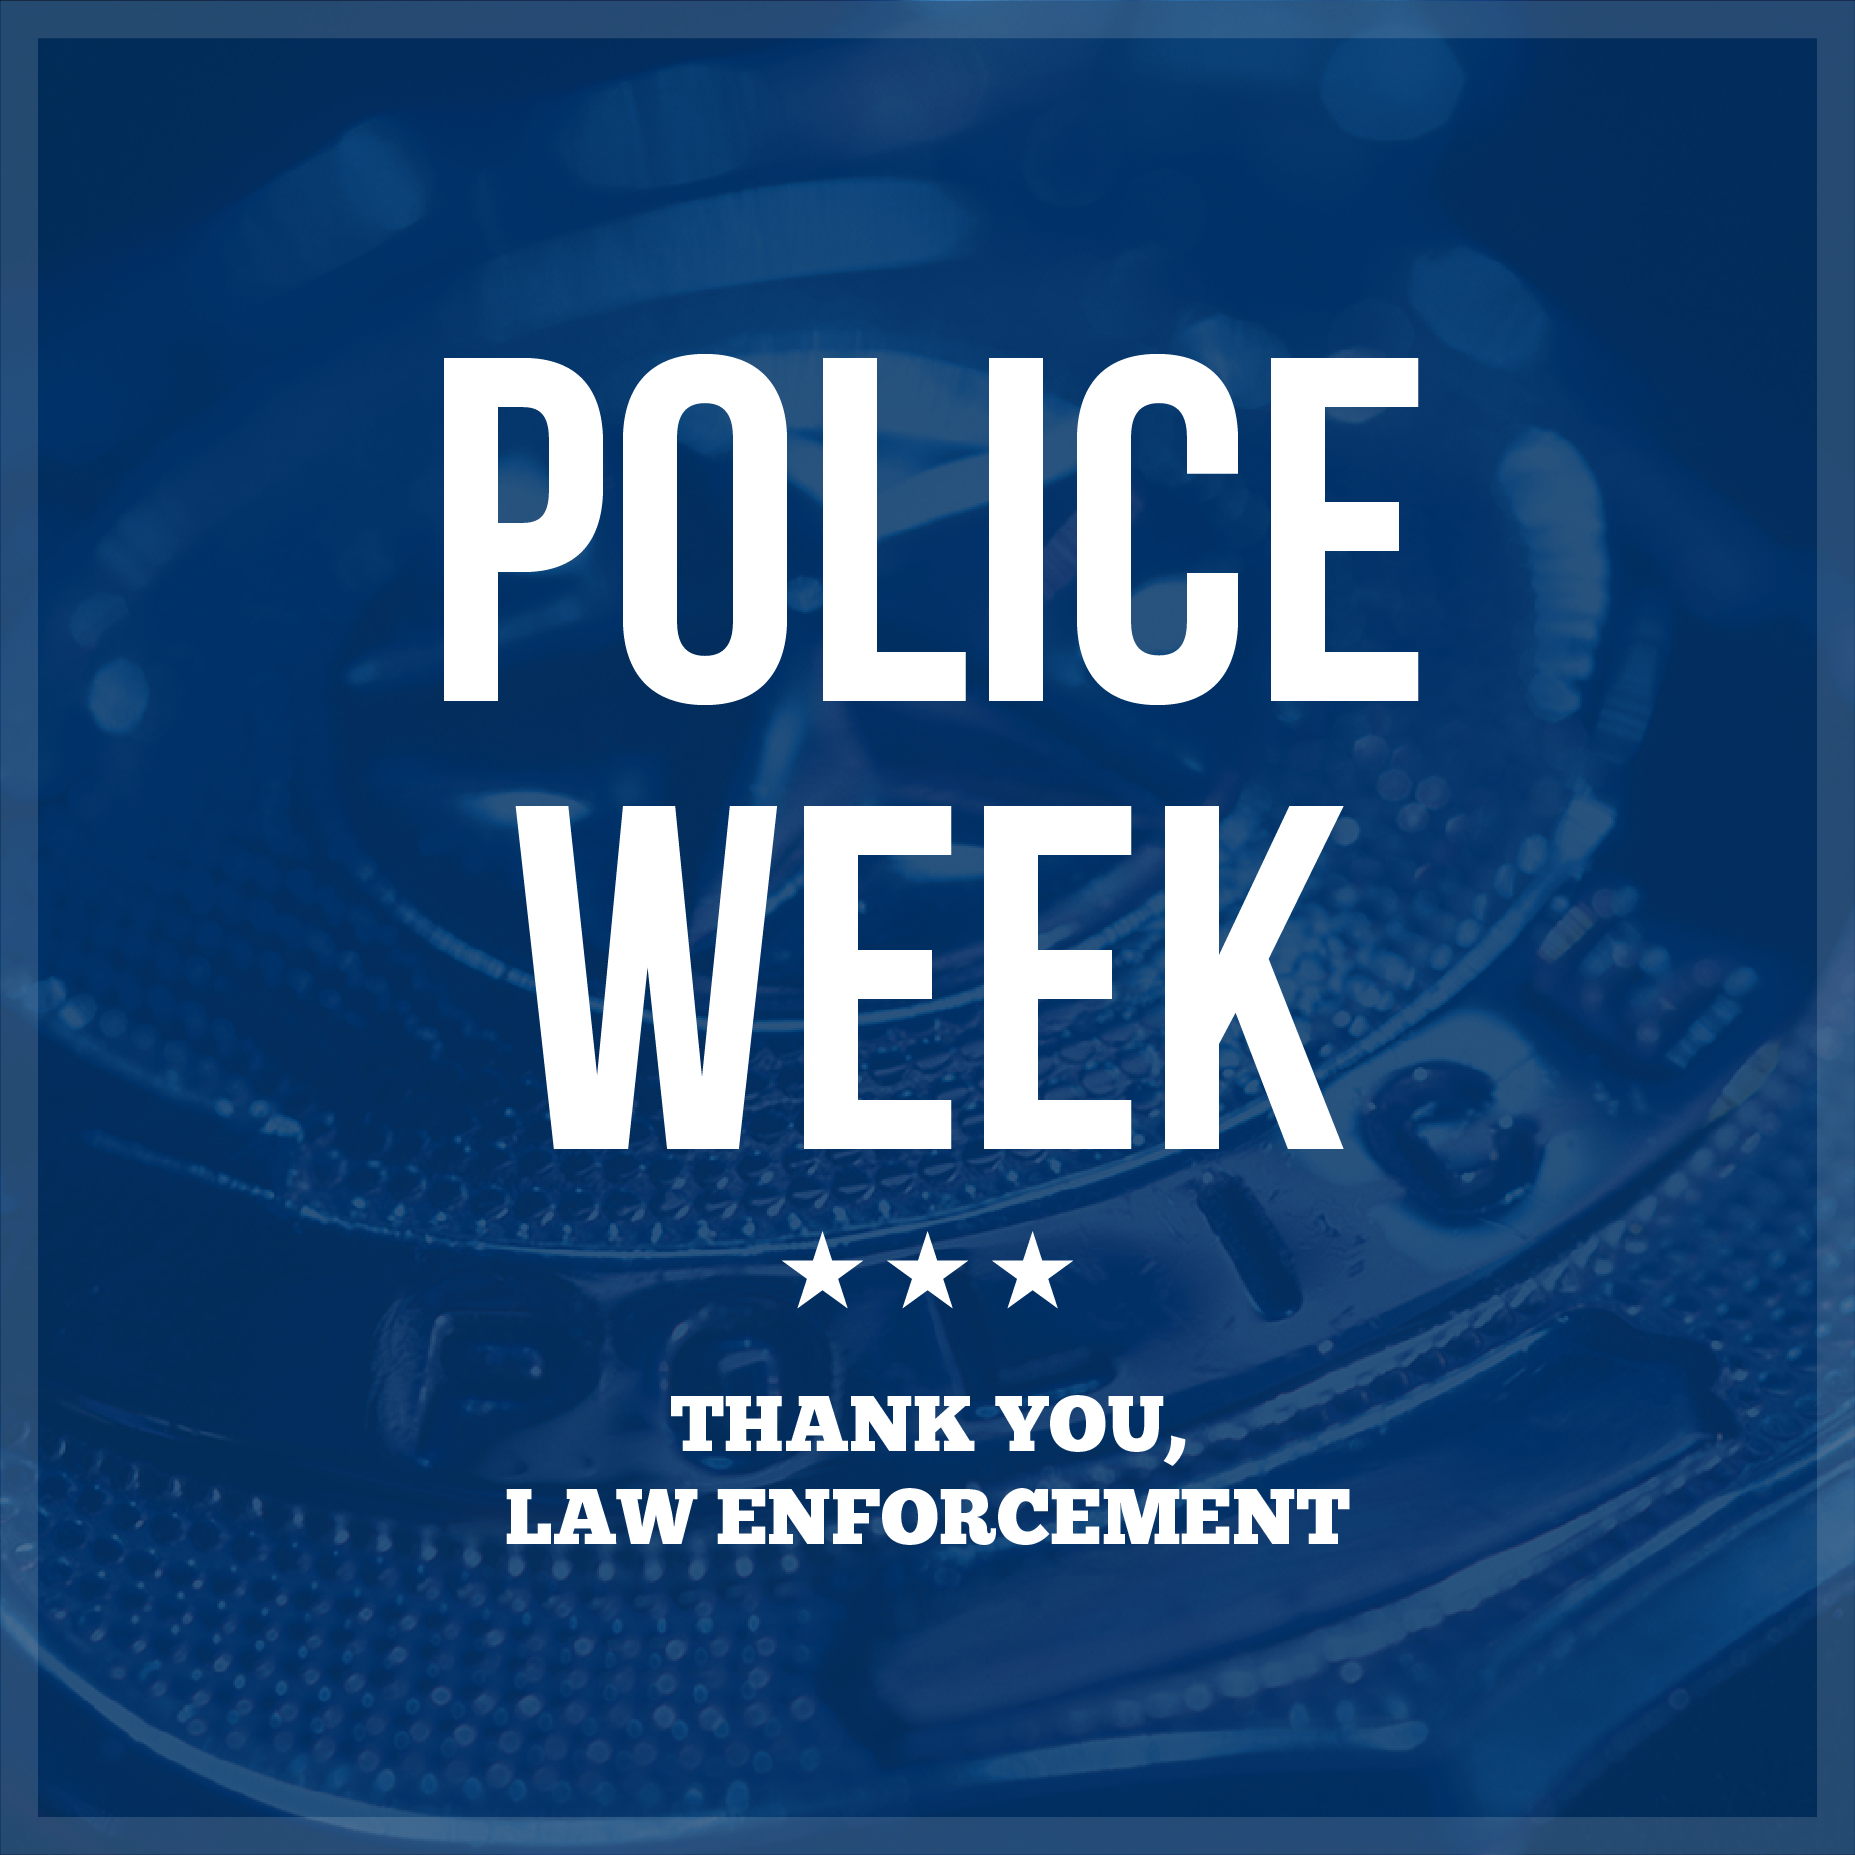 National Police Week Thank you Law Enforcement!